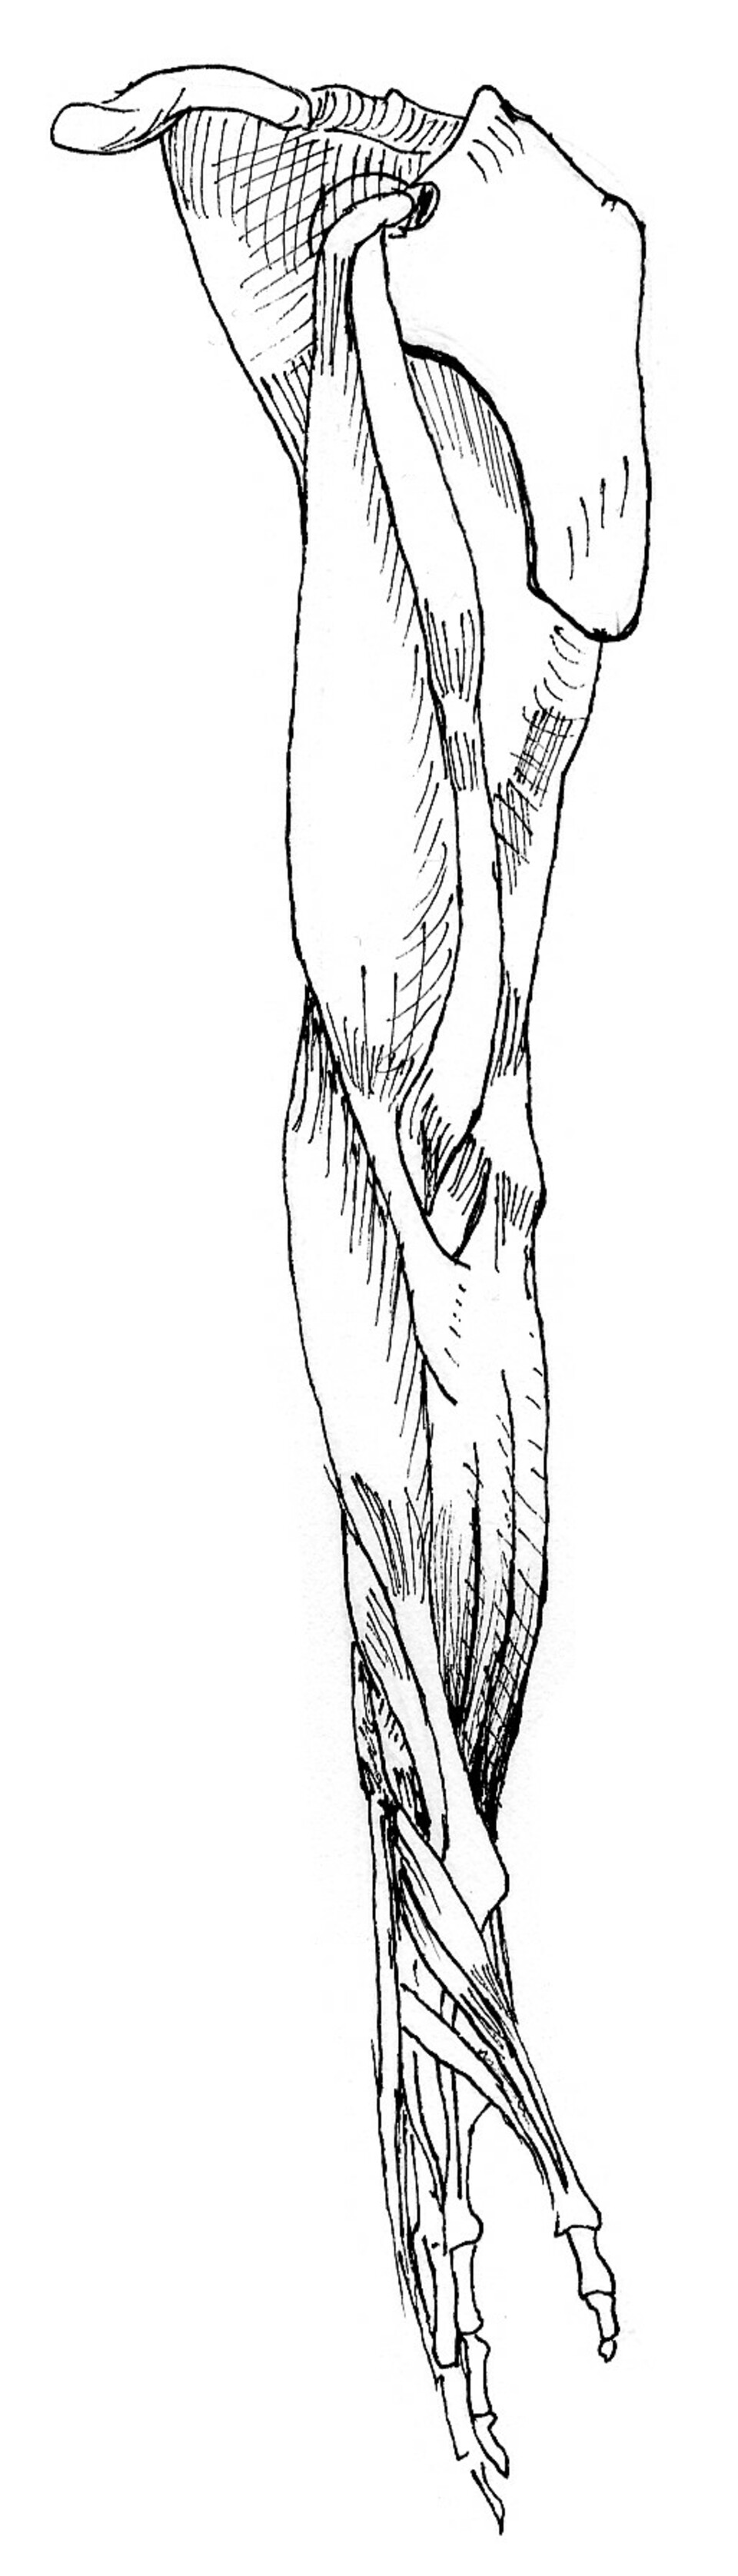 inside view of muscles of right arm, pronated